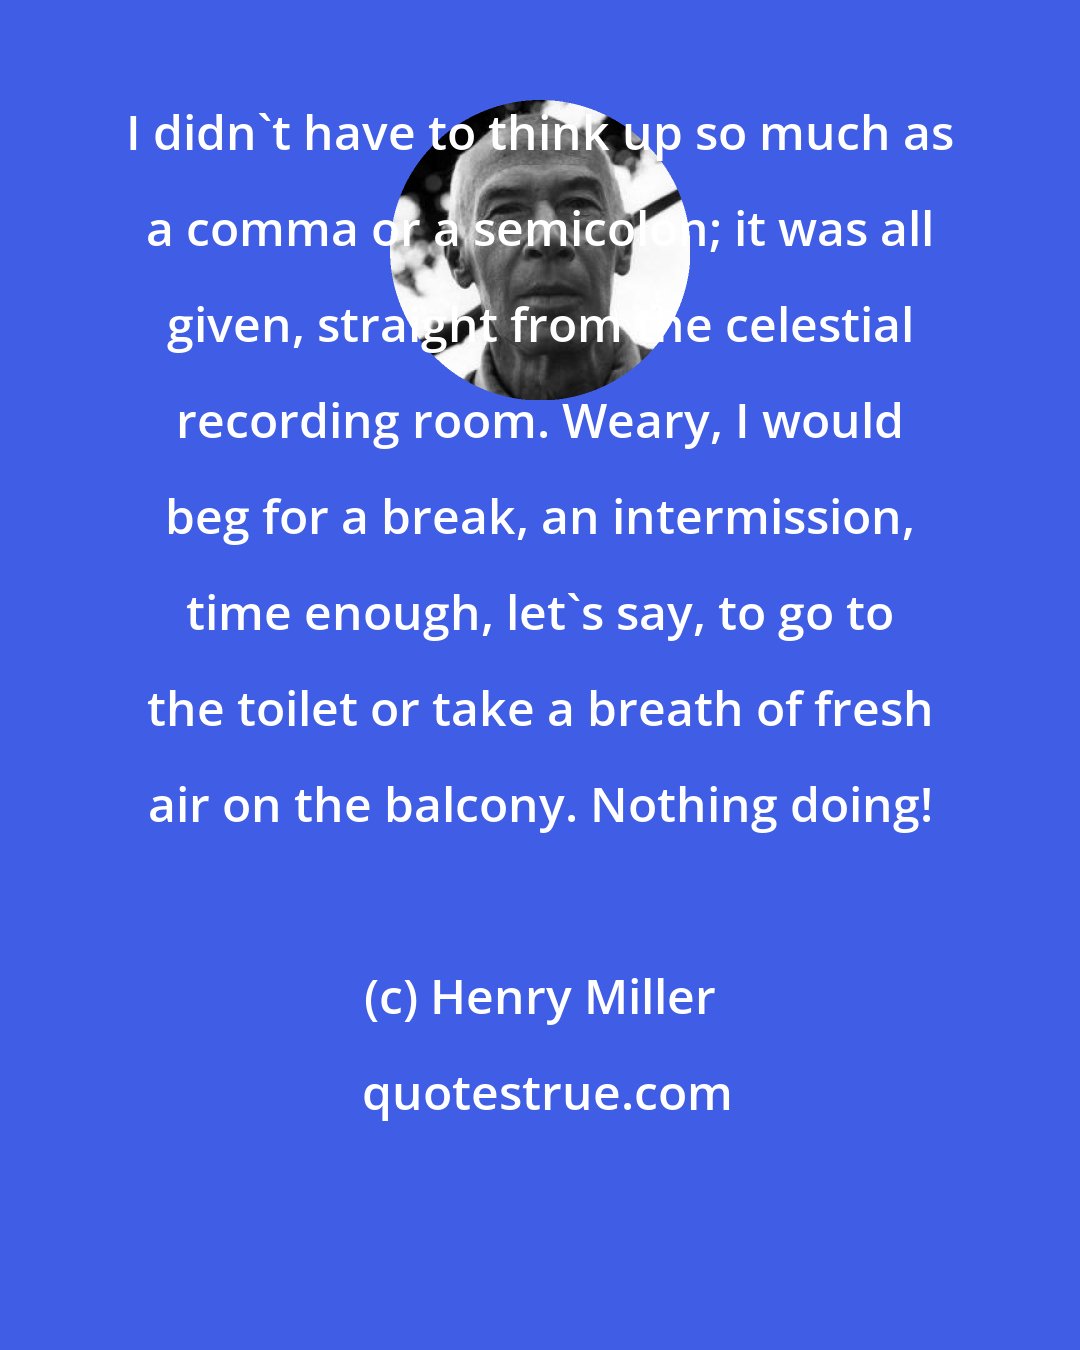 Henry Miller: I didn't have to think up so much as a comma or a semicolon; it was all given, straight from the celestial recording room. Weary, I would beg for a break, an intermission, time enough, let's say, to go to the toilet or take a breath of fresh air on the balcony. Nothing doing!